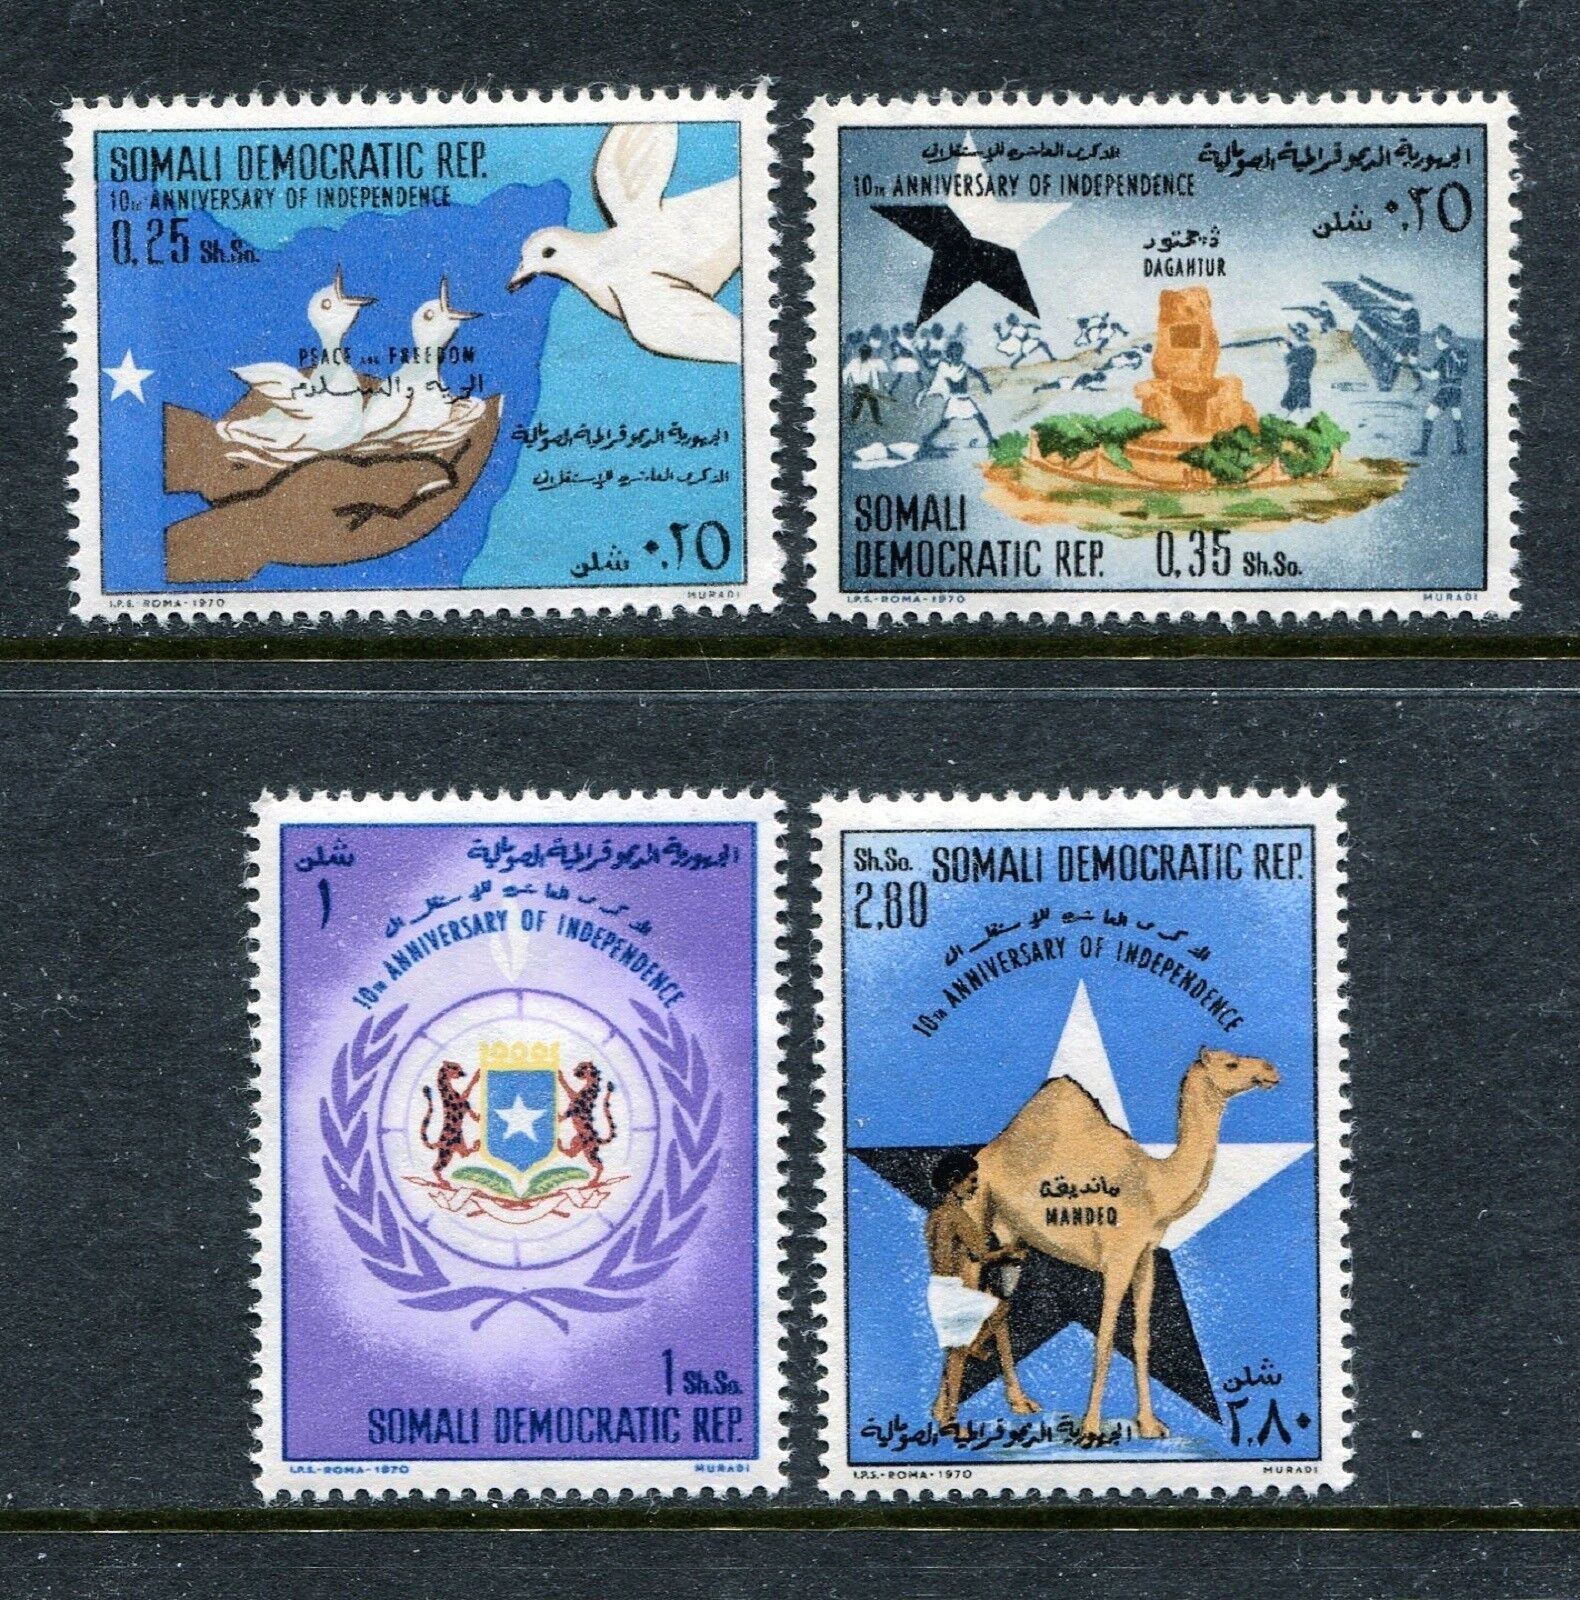 Somalia 360-363 MNH Independence Coat 1970. Max 87% OFF x27926 Oakland Mall of Arms